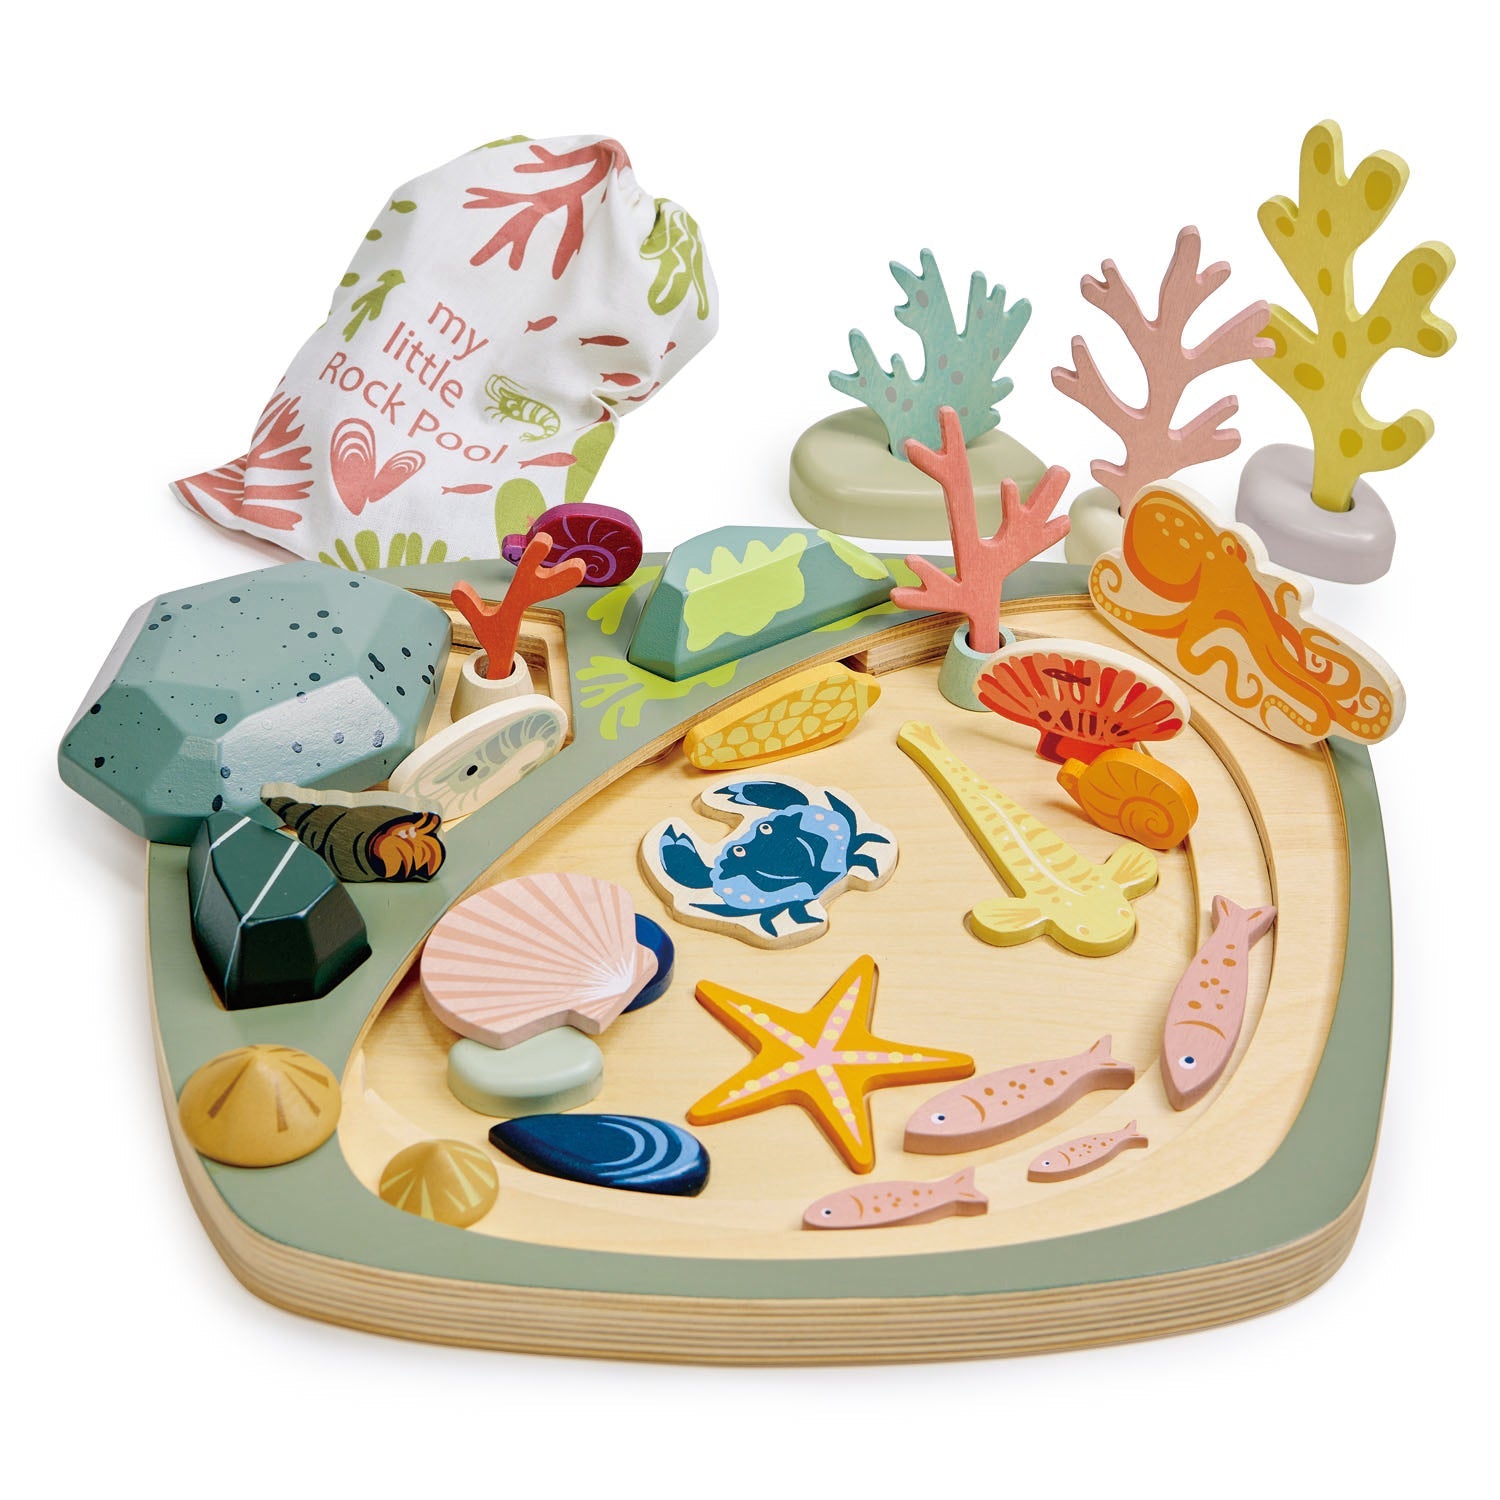 My Little Rock Pool" by Tender Leaf Toys - A plastic-free Montessori toy featuring beautifully painted wooden pieces for stacking and sorting on a layered rock pool base, with coral elements for creating a 3D ocean world.